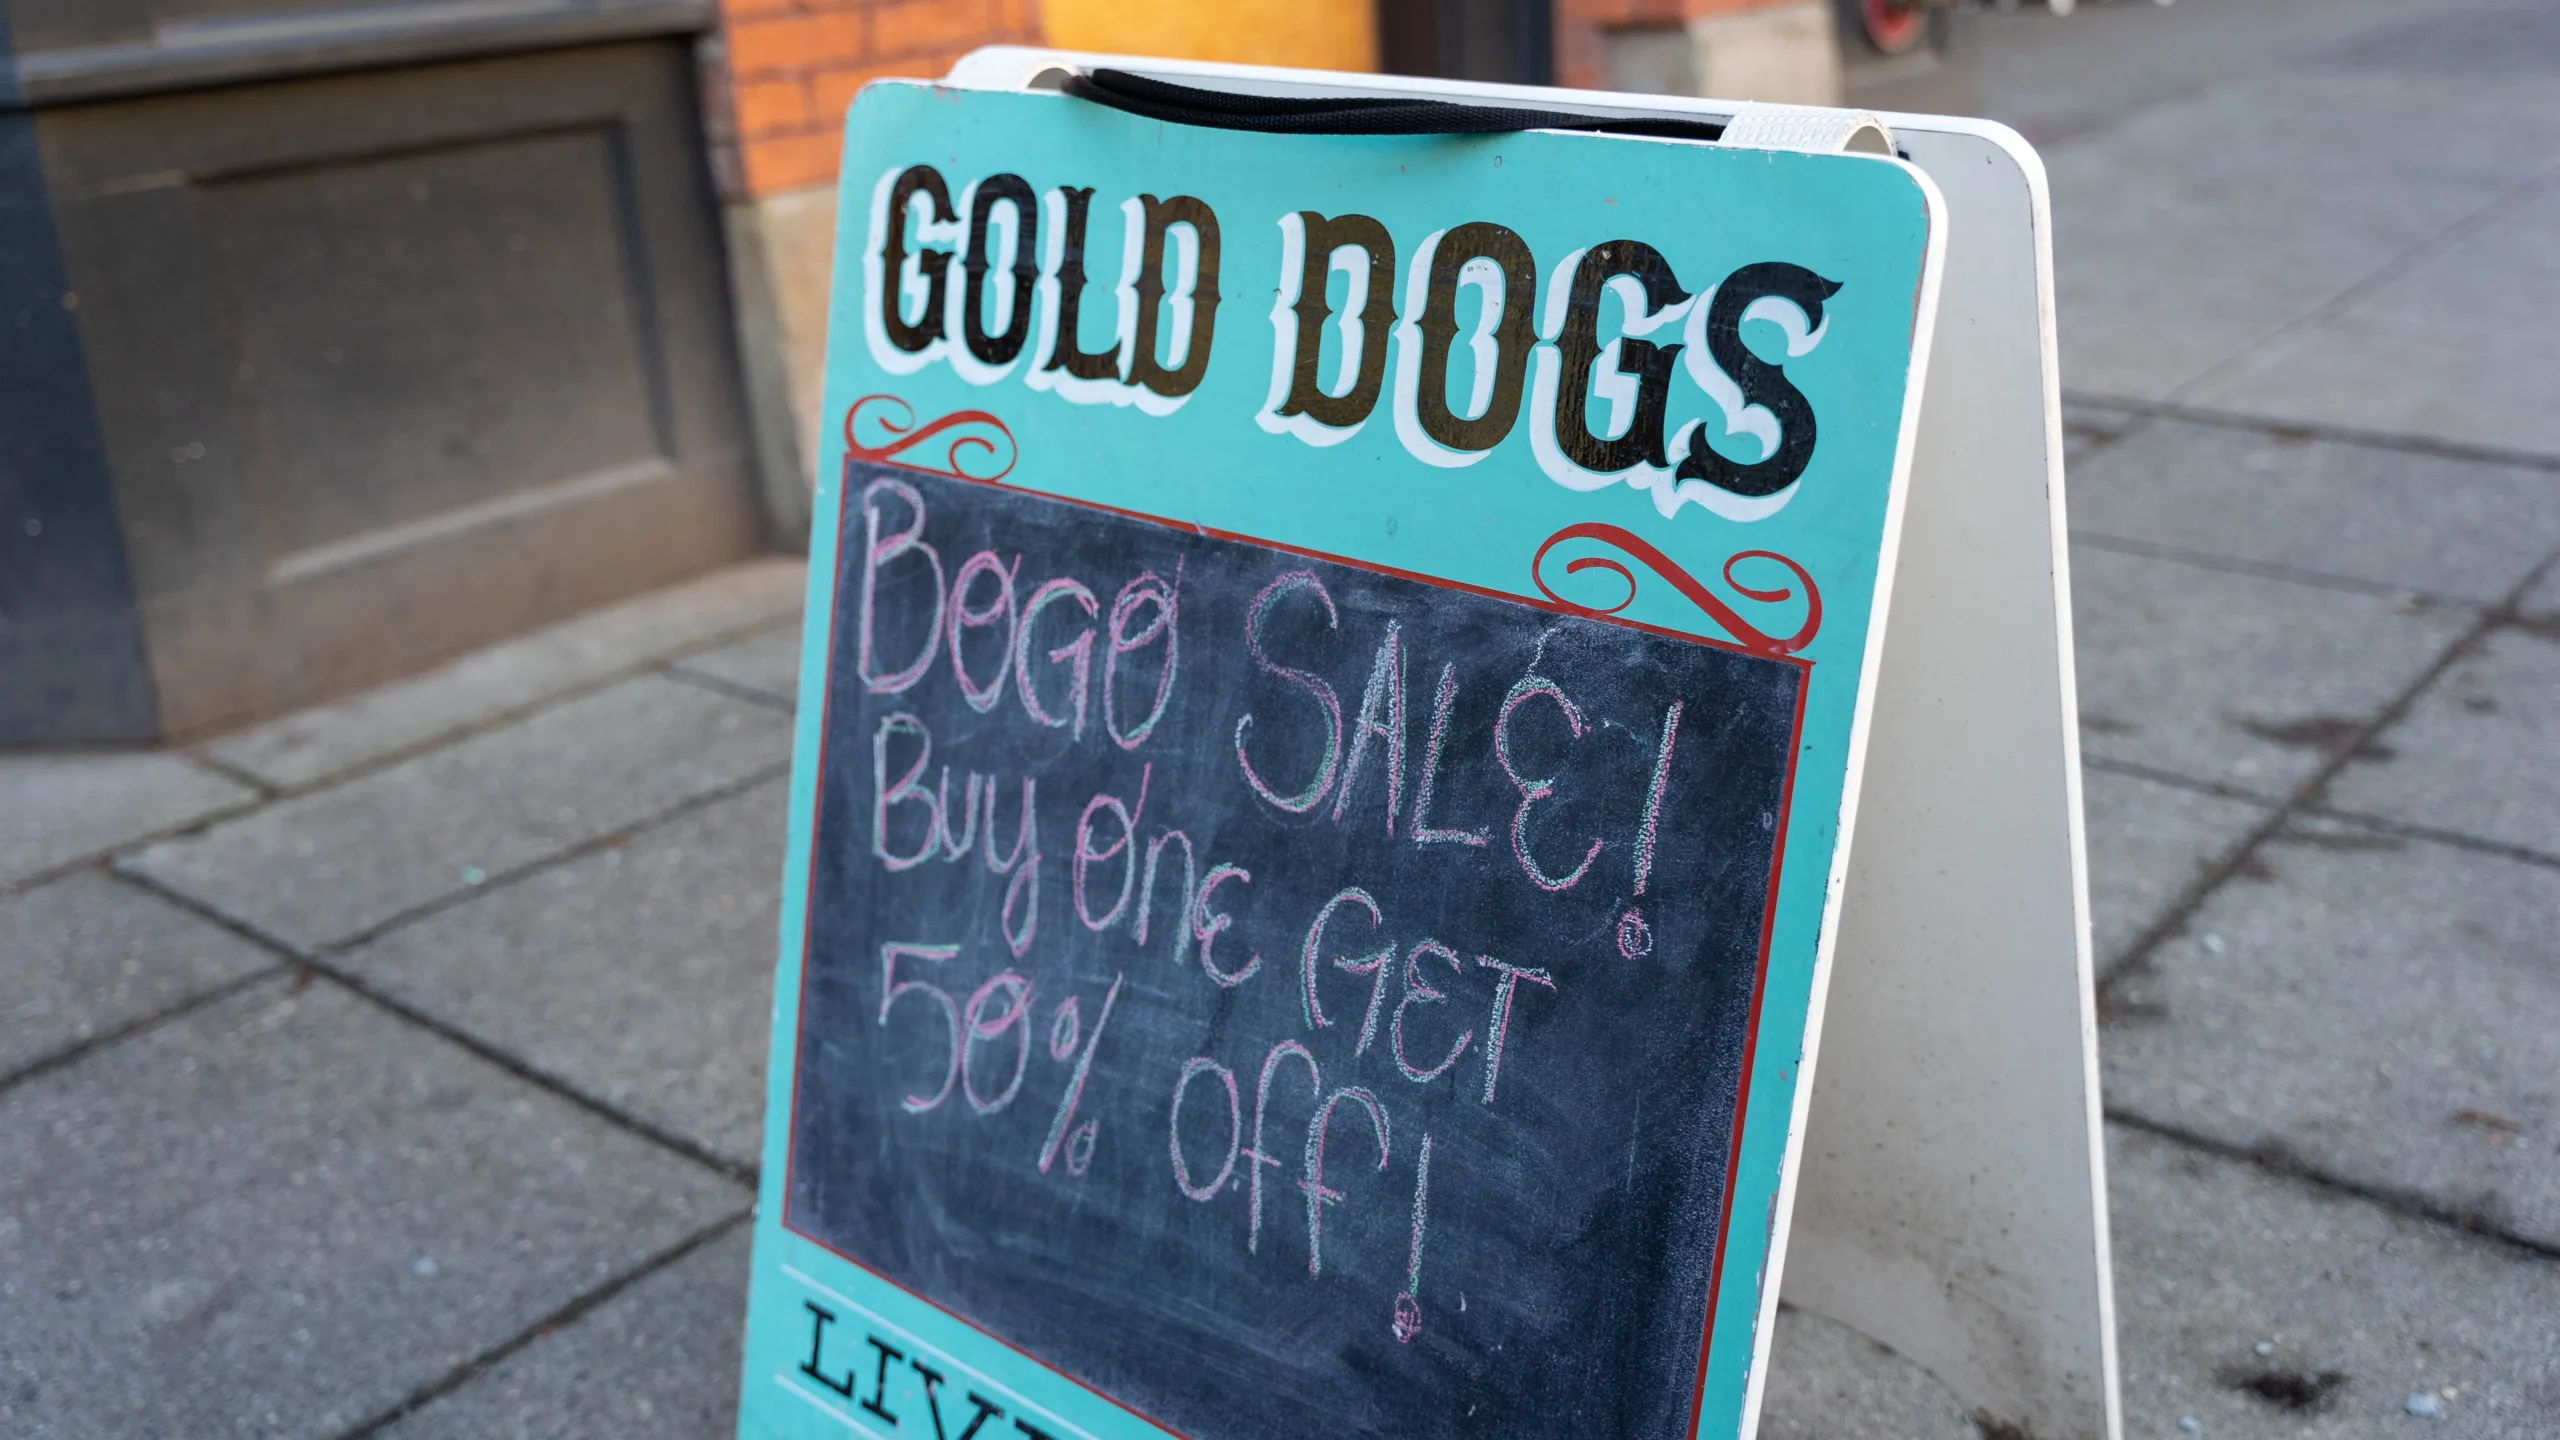 A turquoise sign outside of Gold Dogs on Ballard Ave reads "GOLD DOGS" and lists a "BOGO SALE" in chalk